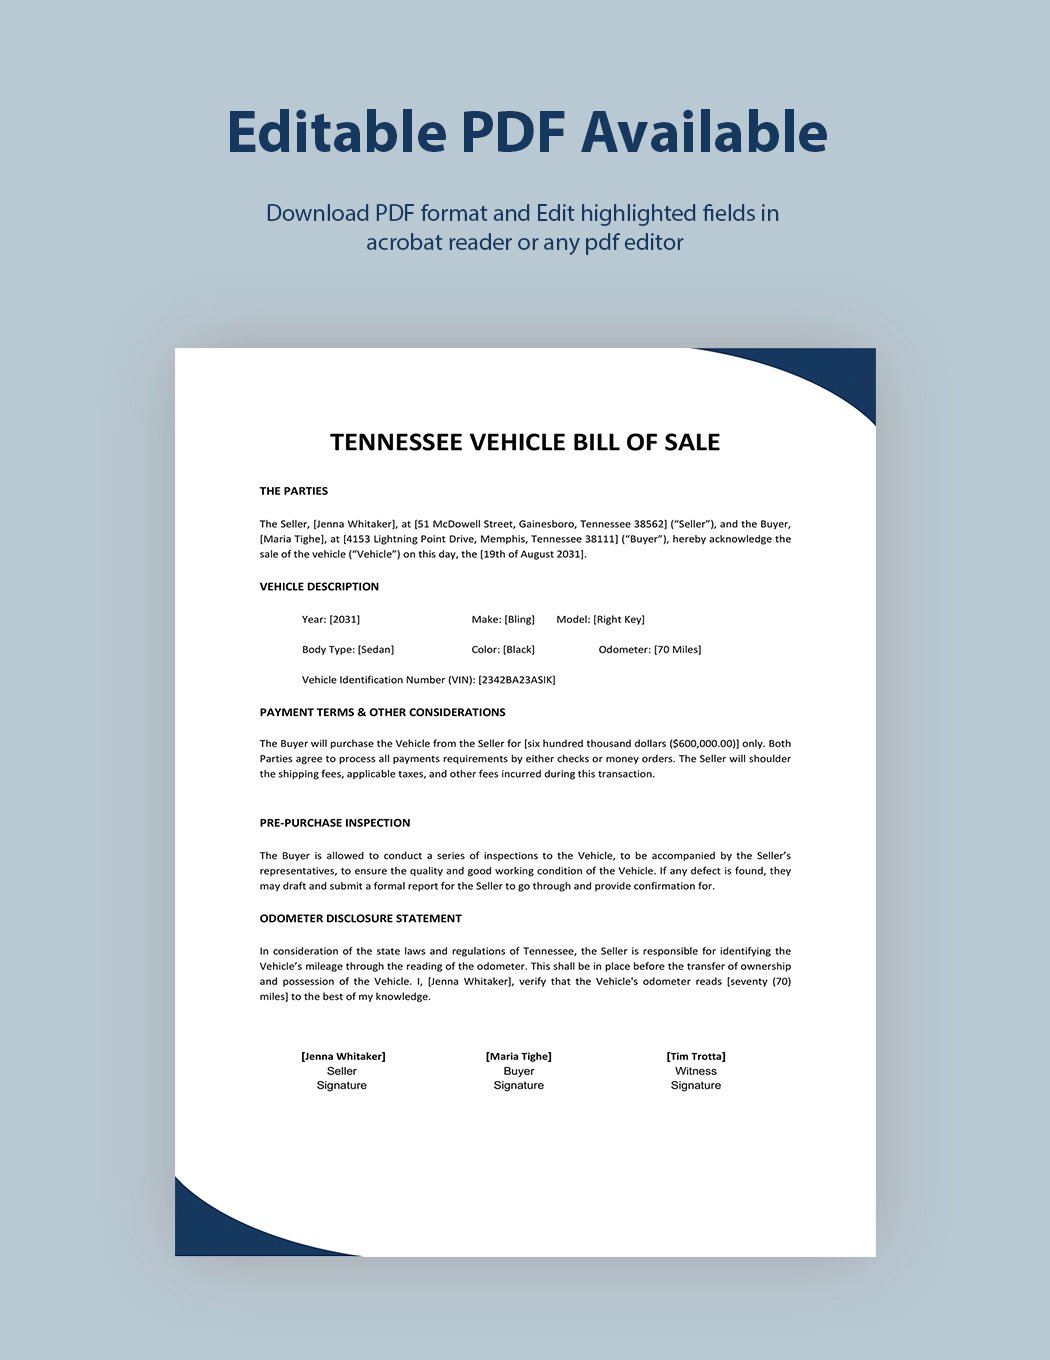 Tennessee Vehicle Bill of Sale Template